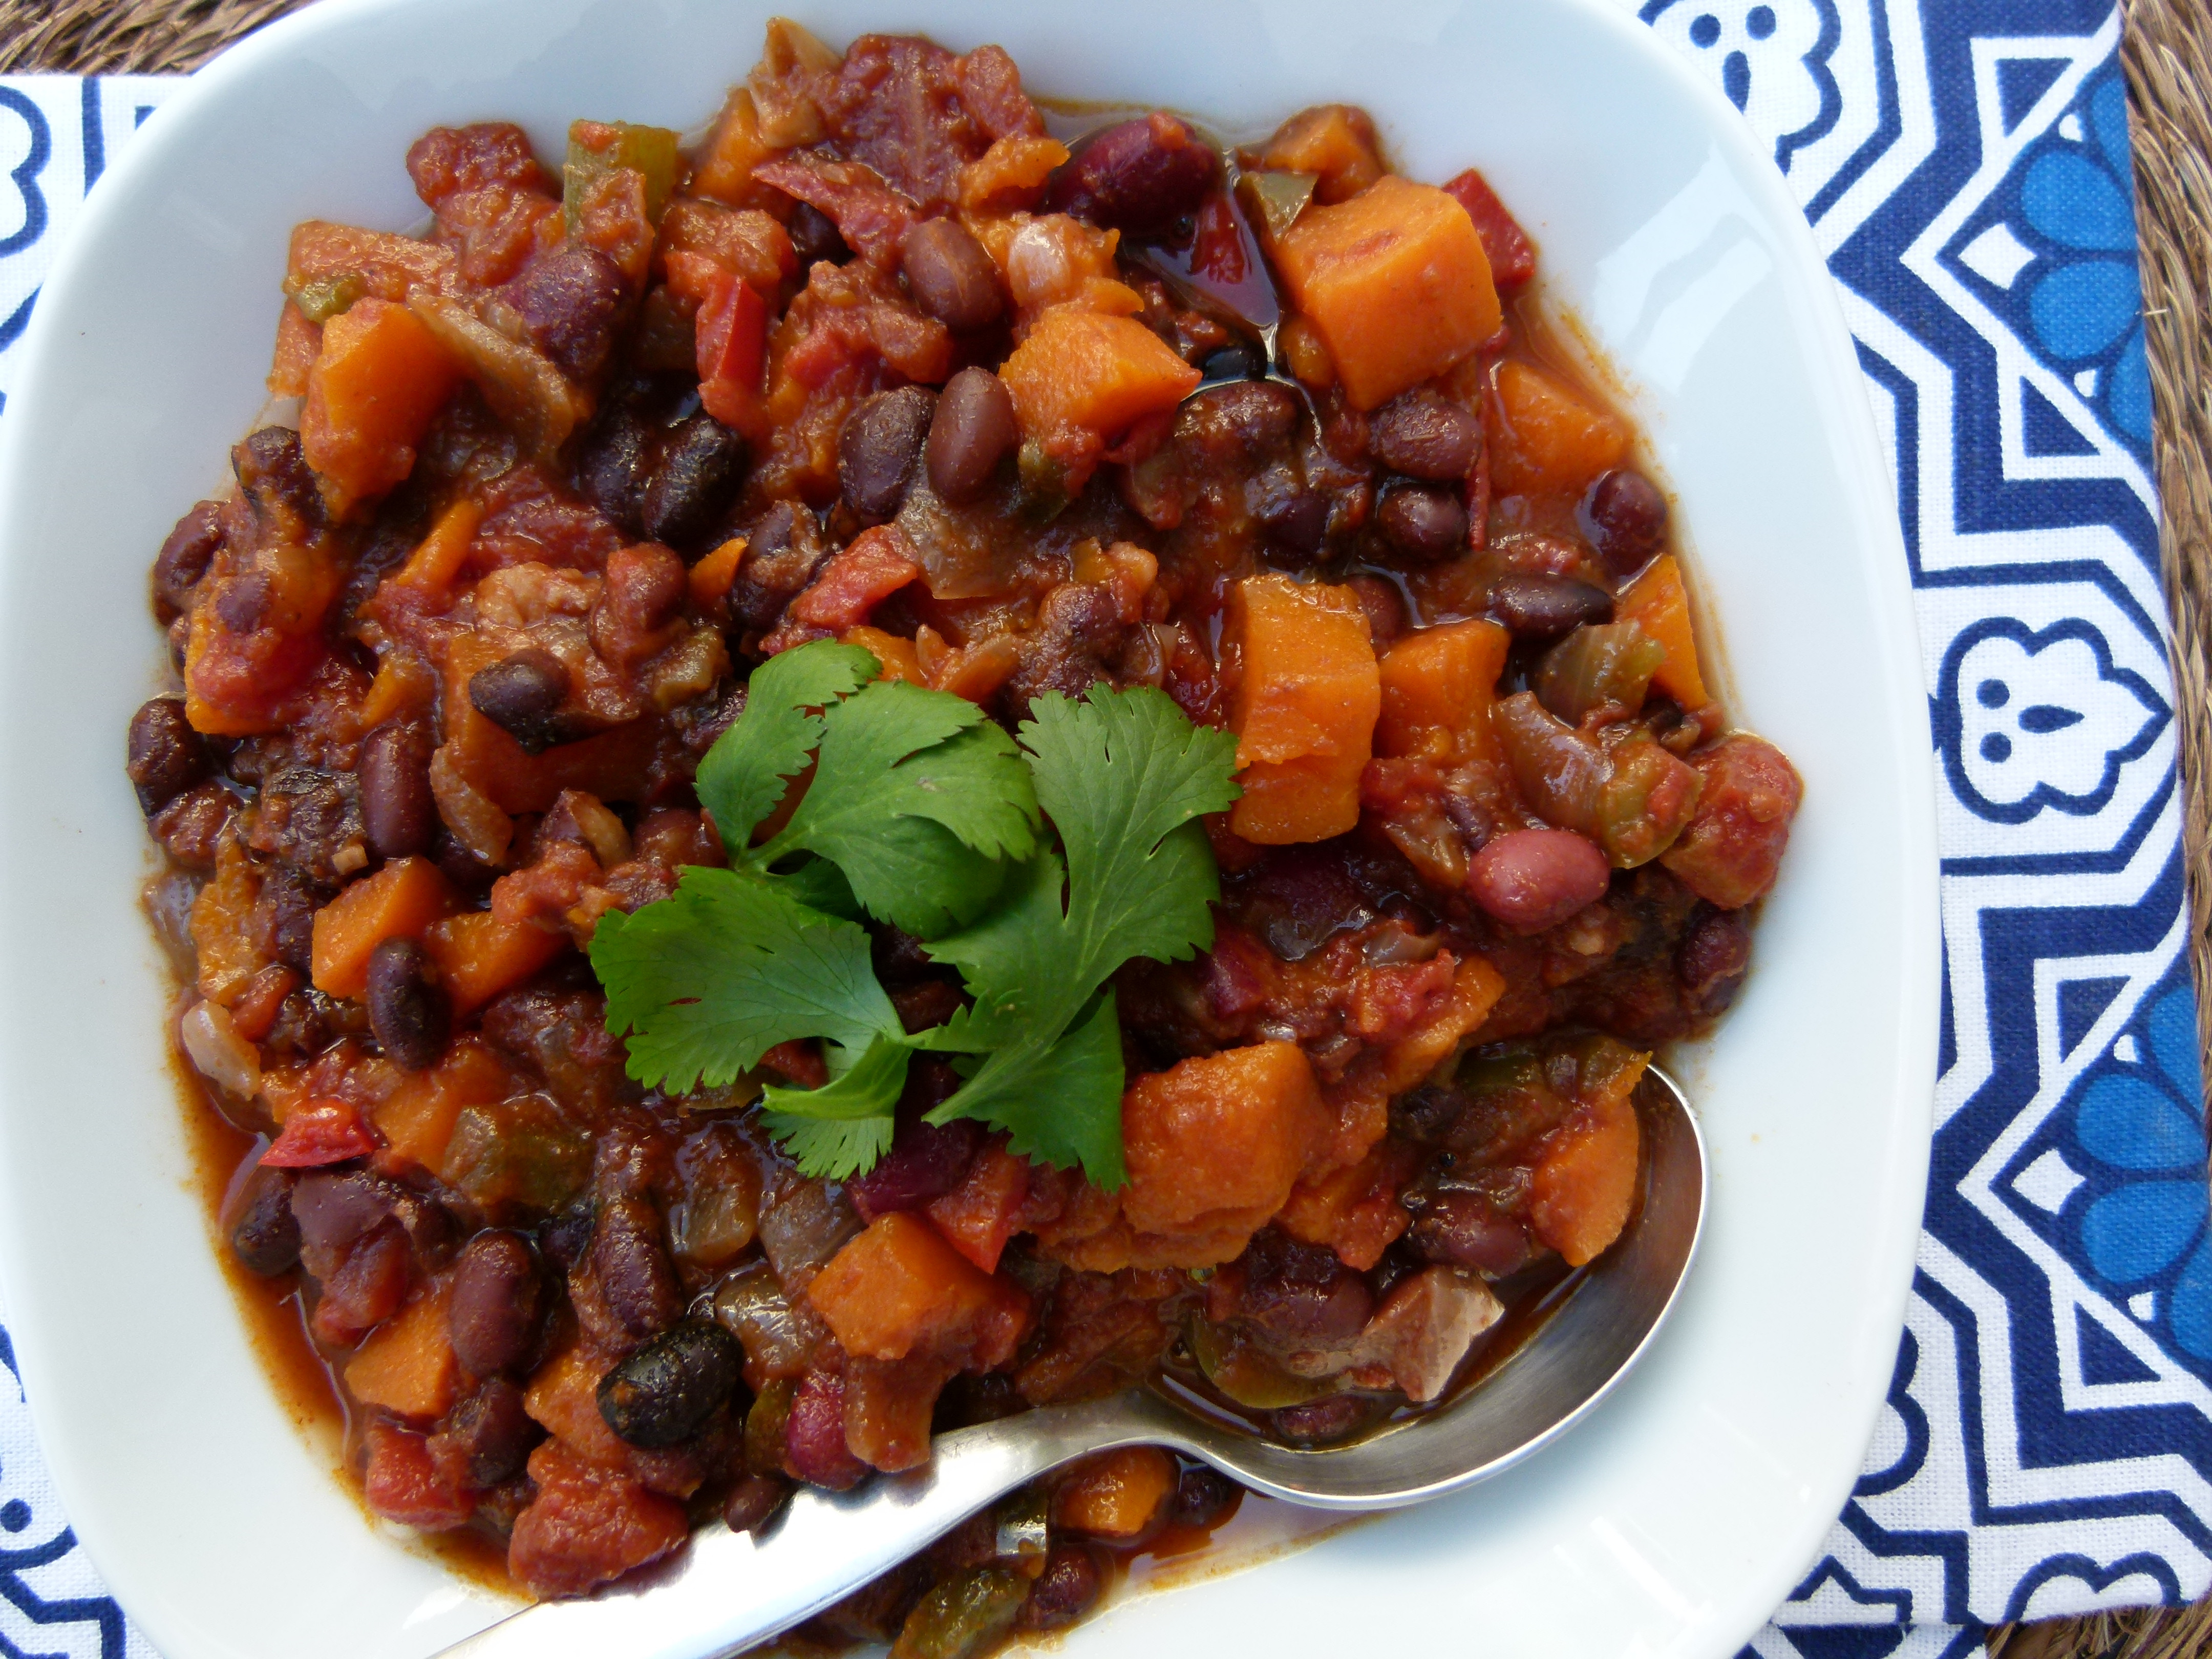 Vegetarian Chili With Sweet Potato
 slow cooker ve arian chili with sweet potatoes stovetop